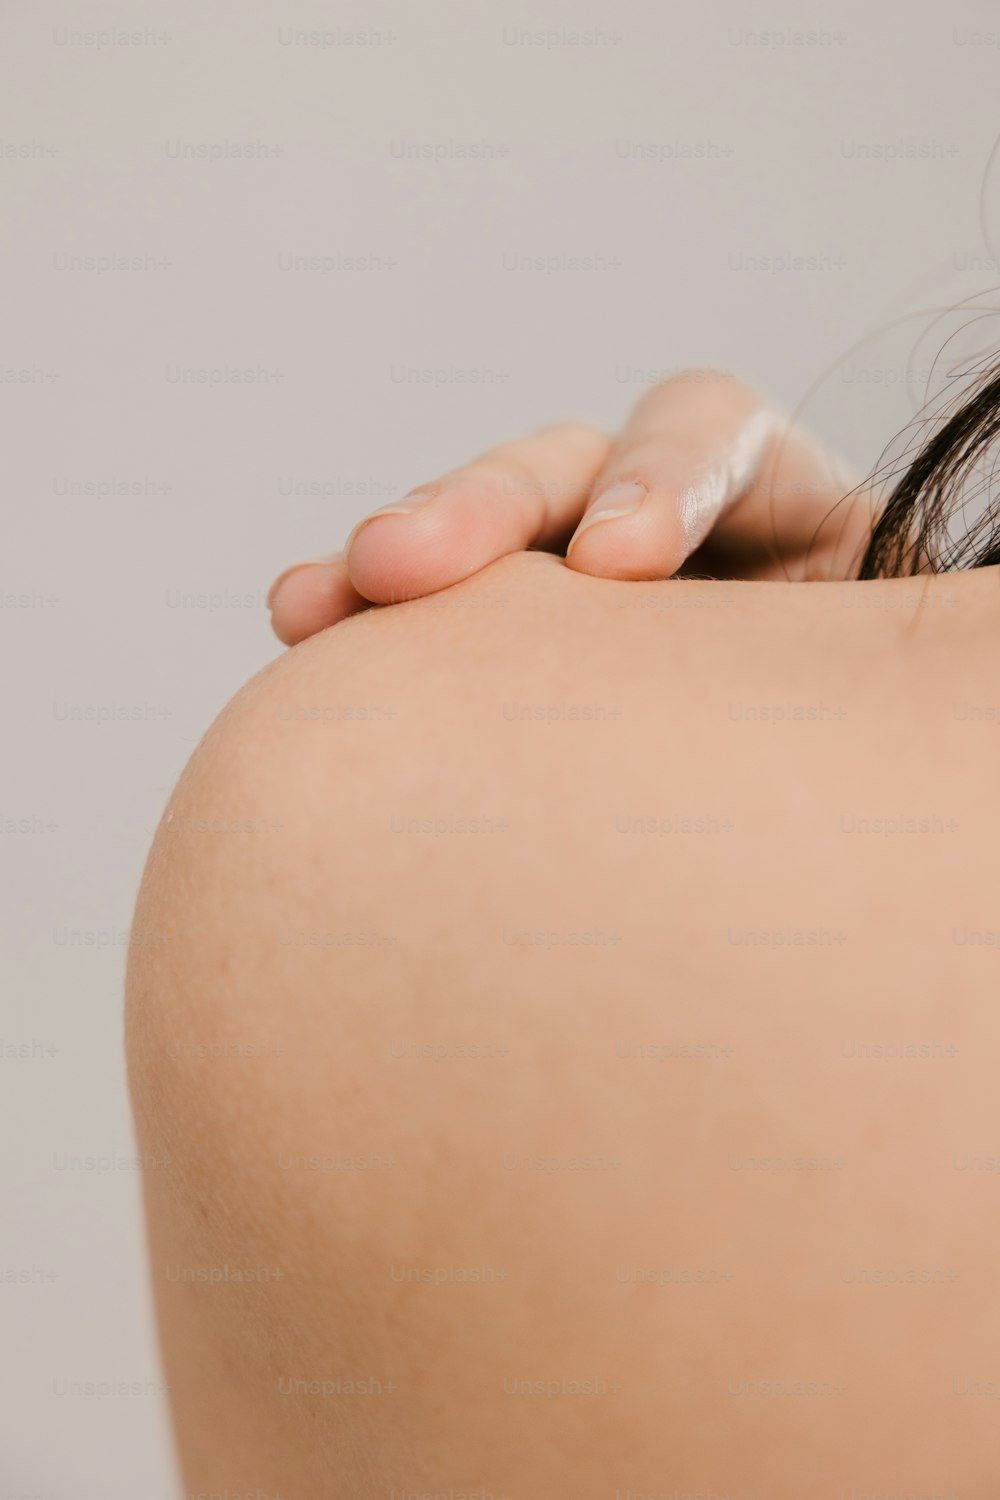 a close up of a woman's back with her hand on her shoulder